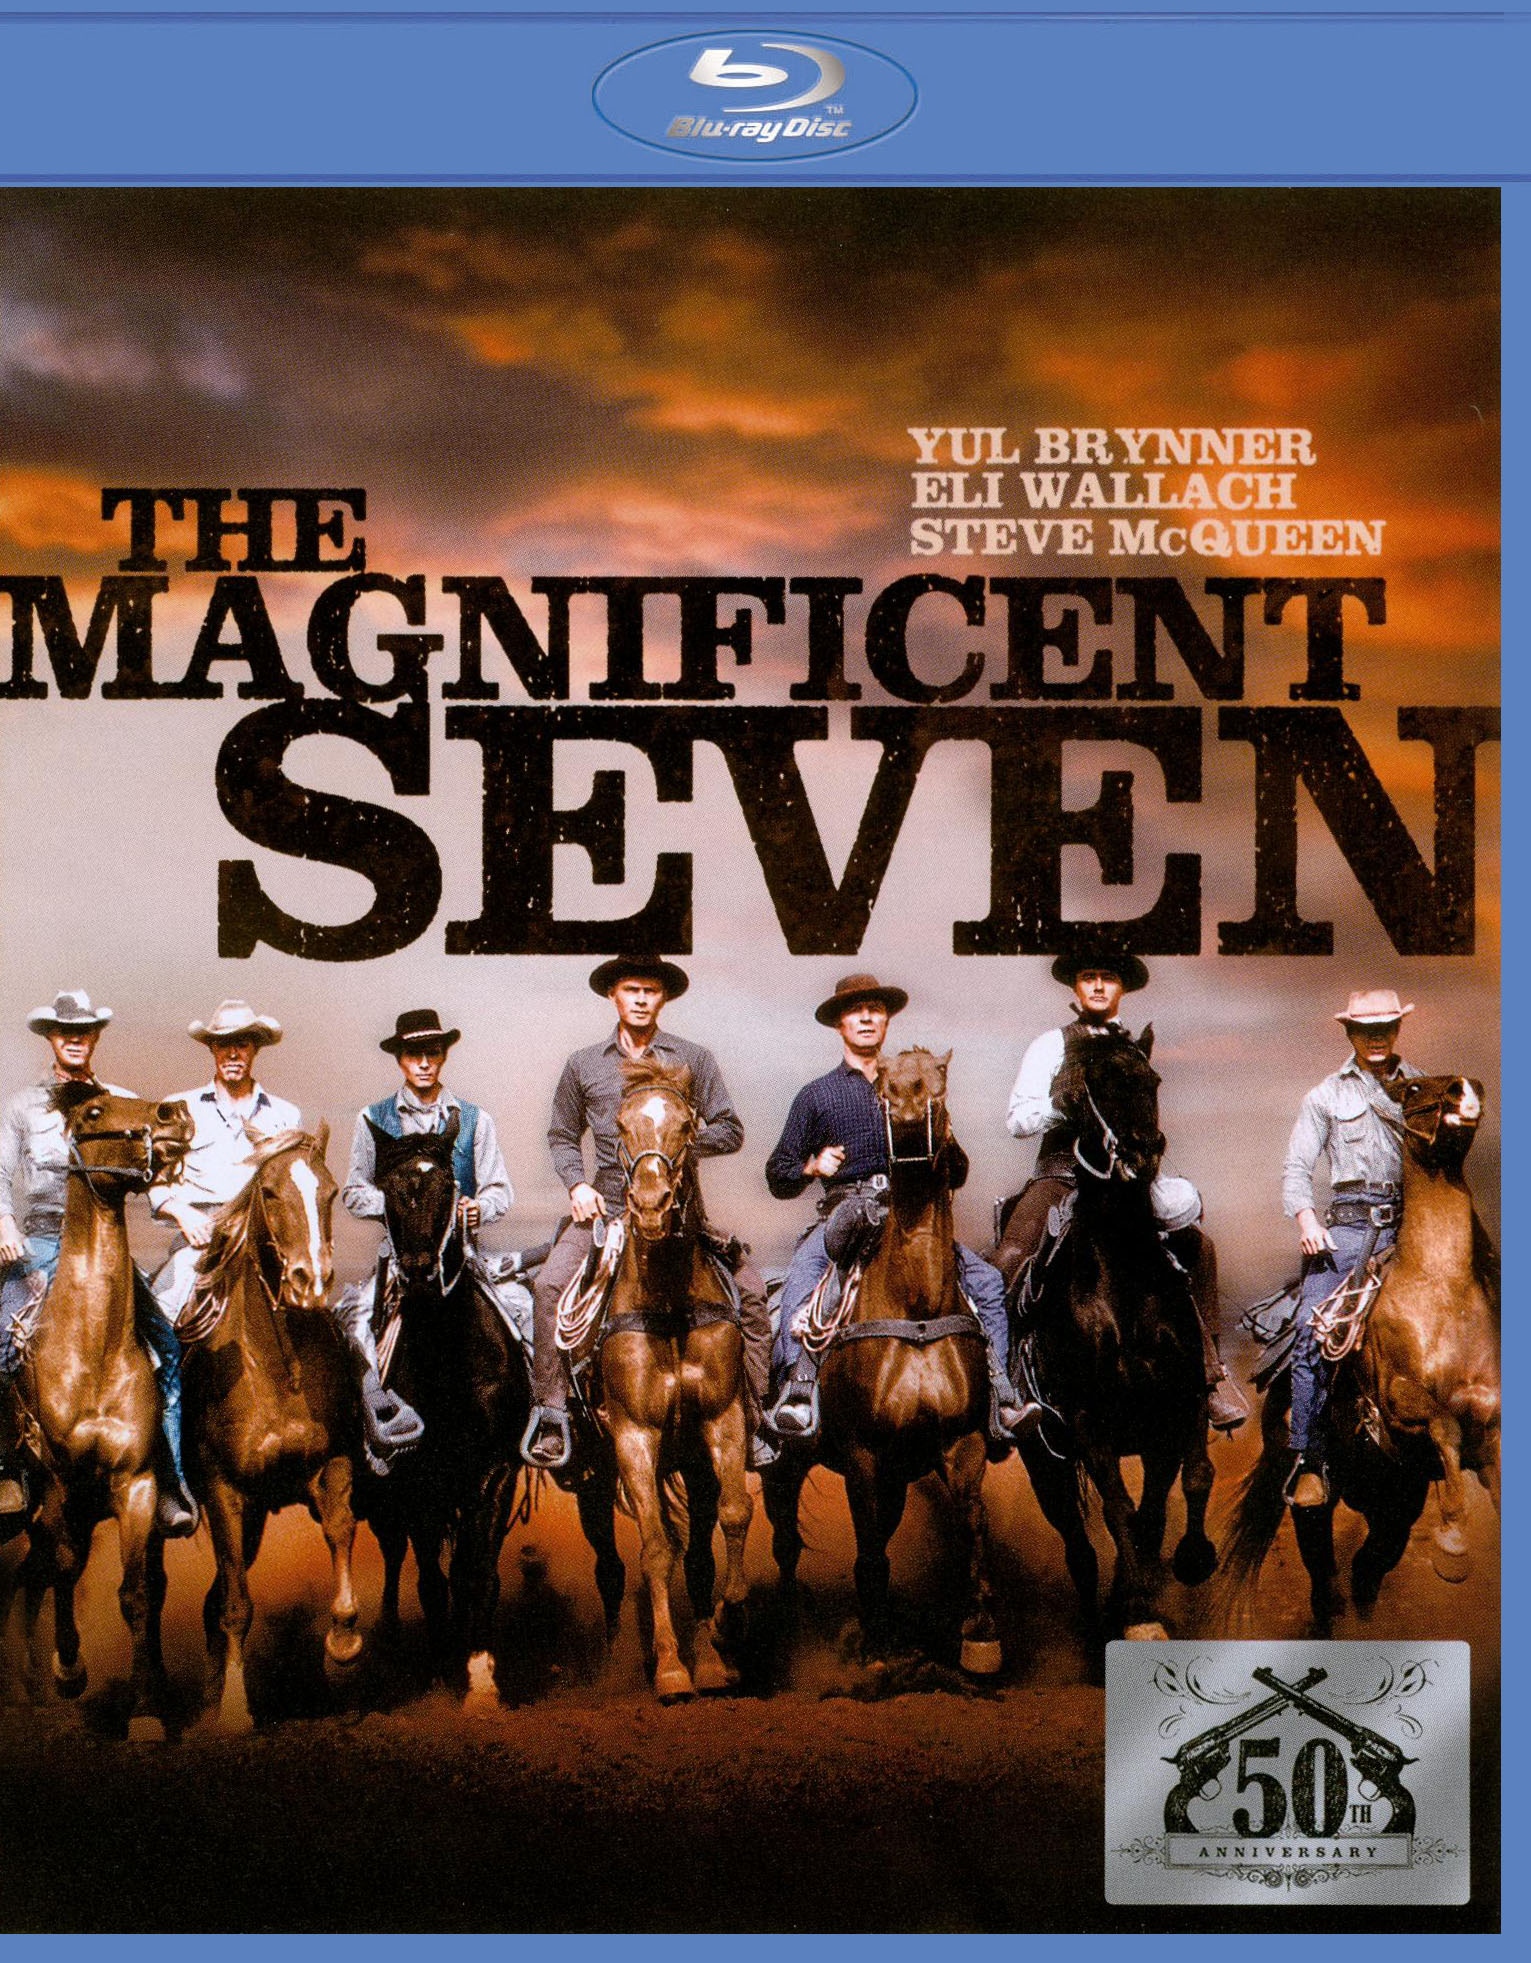 The Magnificent Seven (1960) 4K UHD Blu-ray Review! 